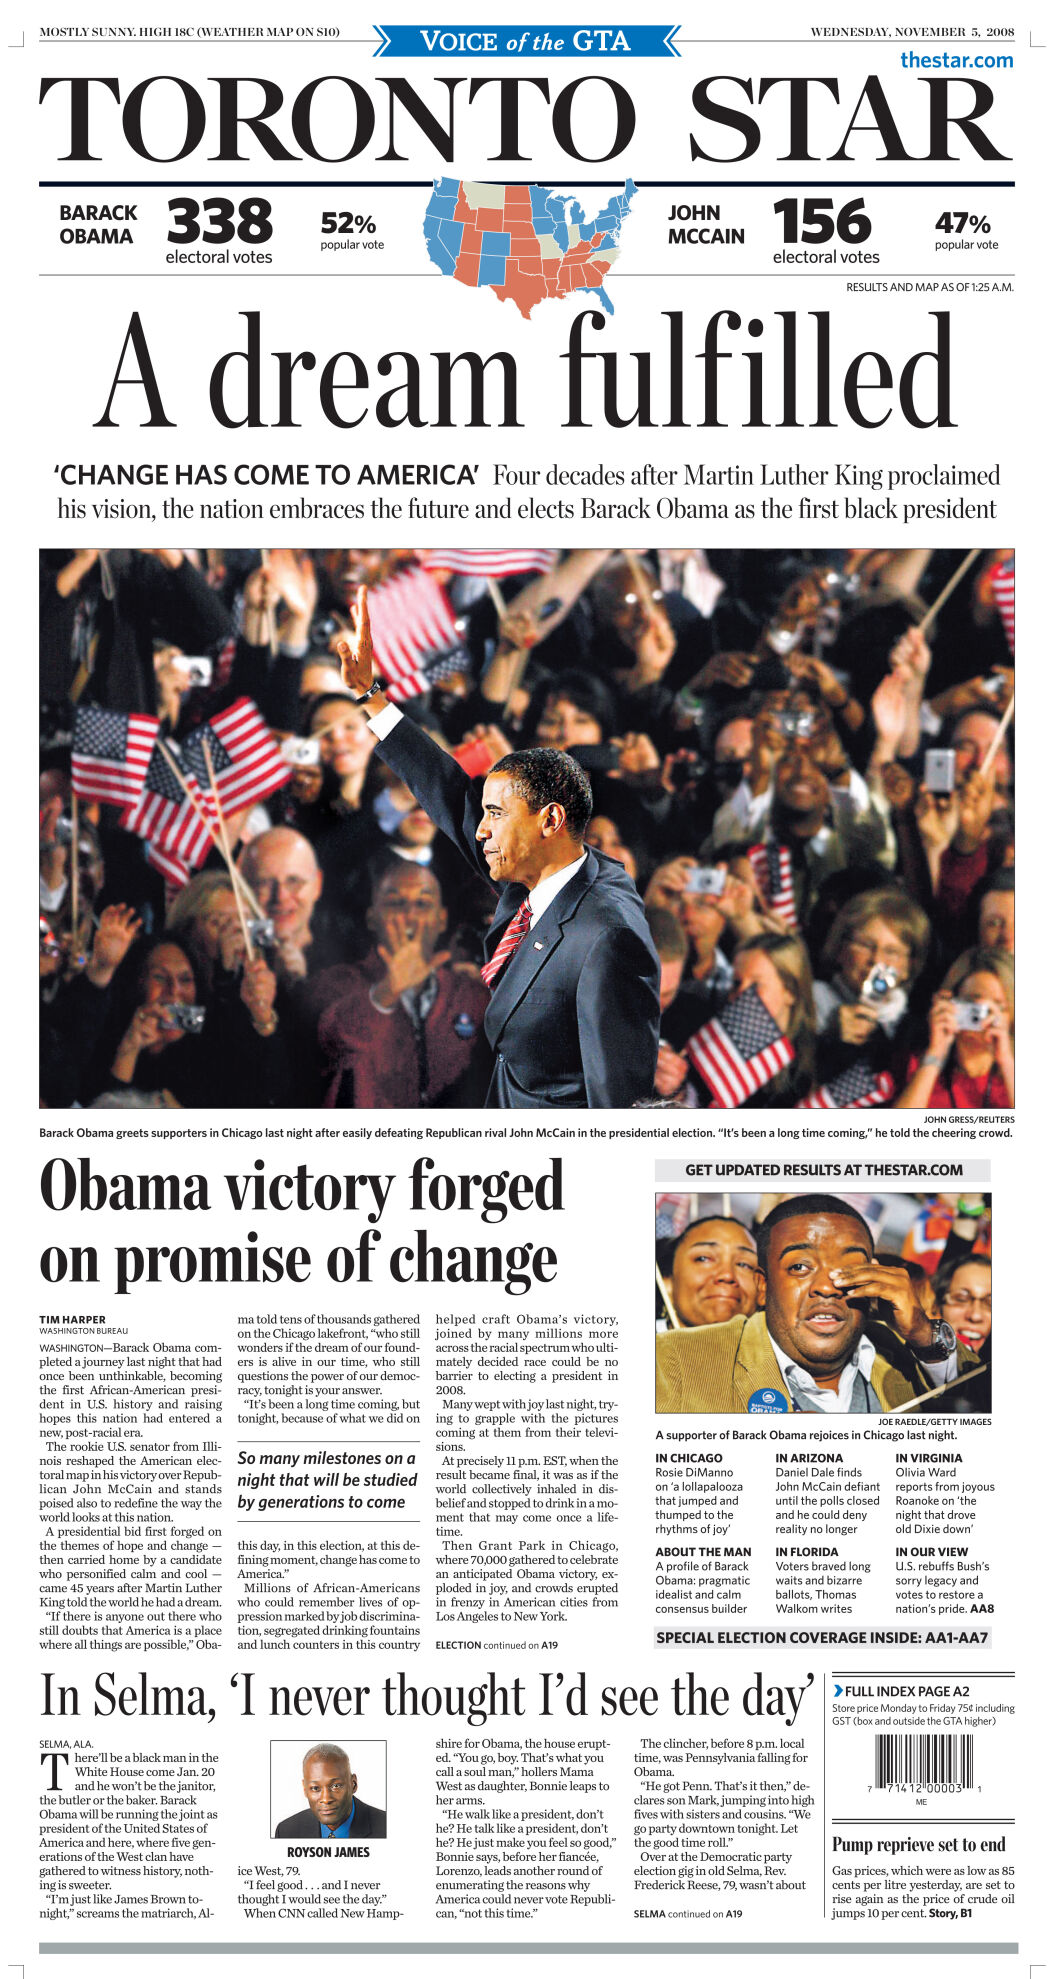 The Washington Post's front page from every presidential election